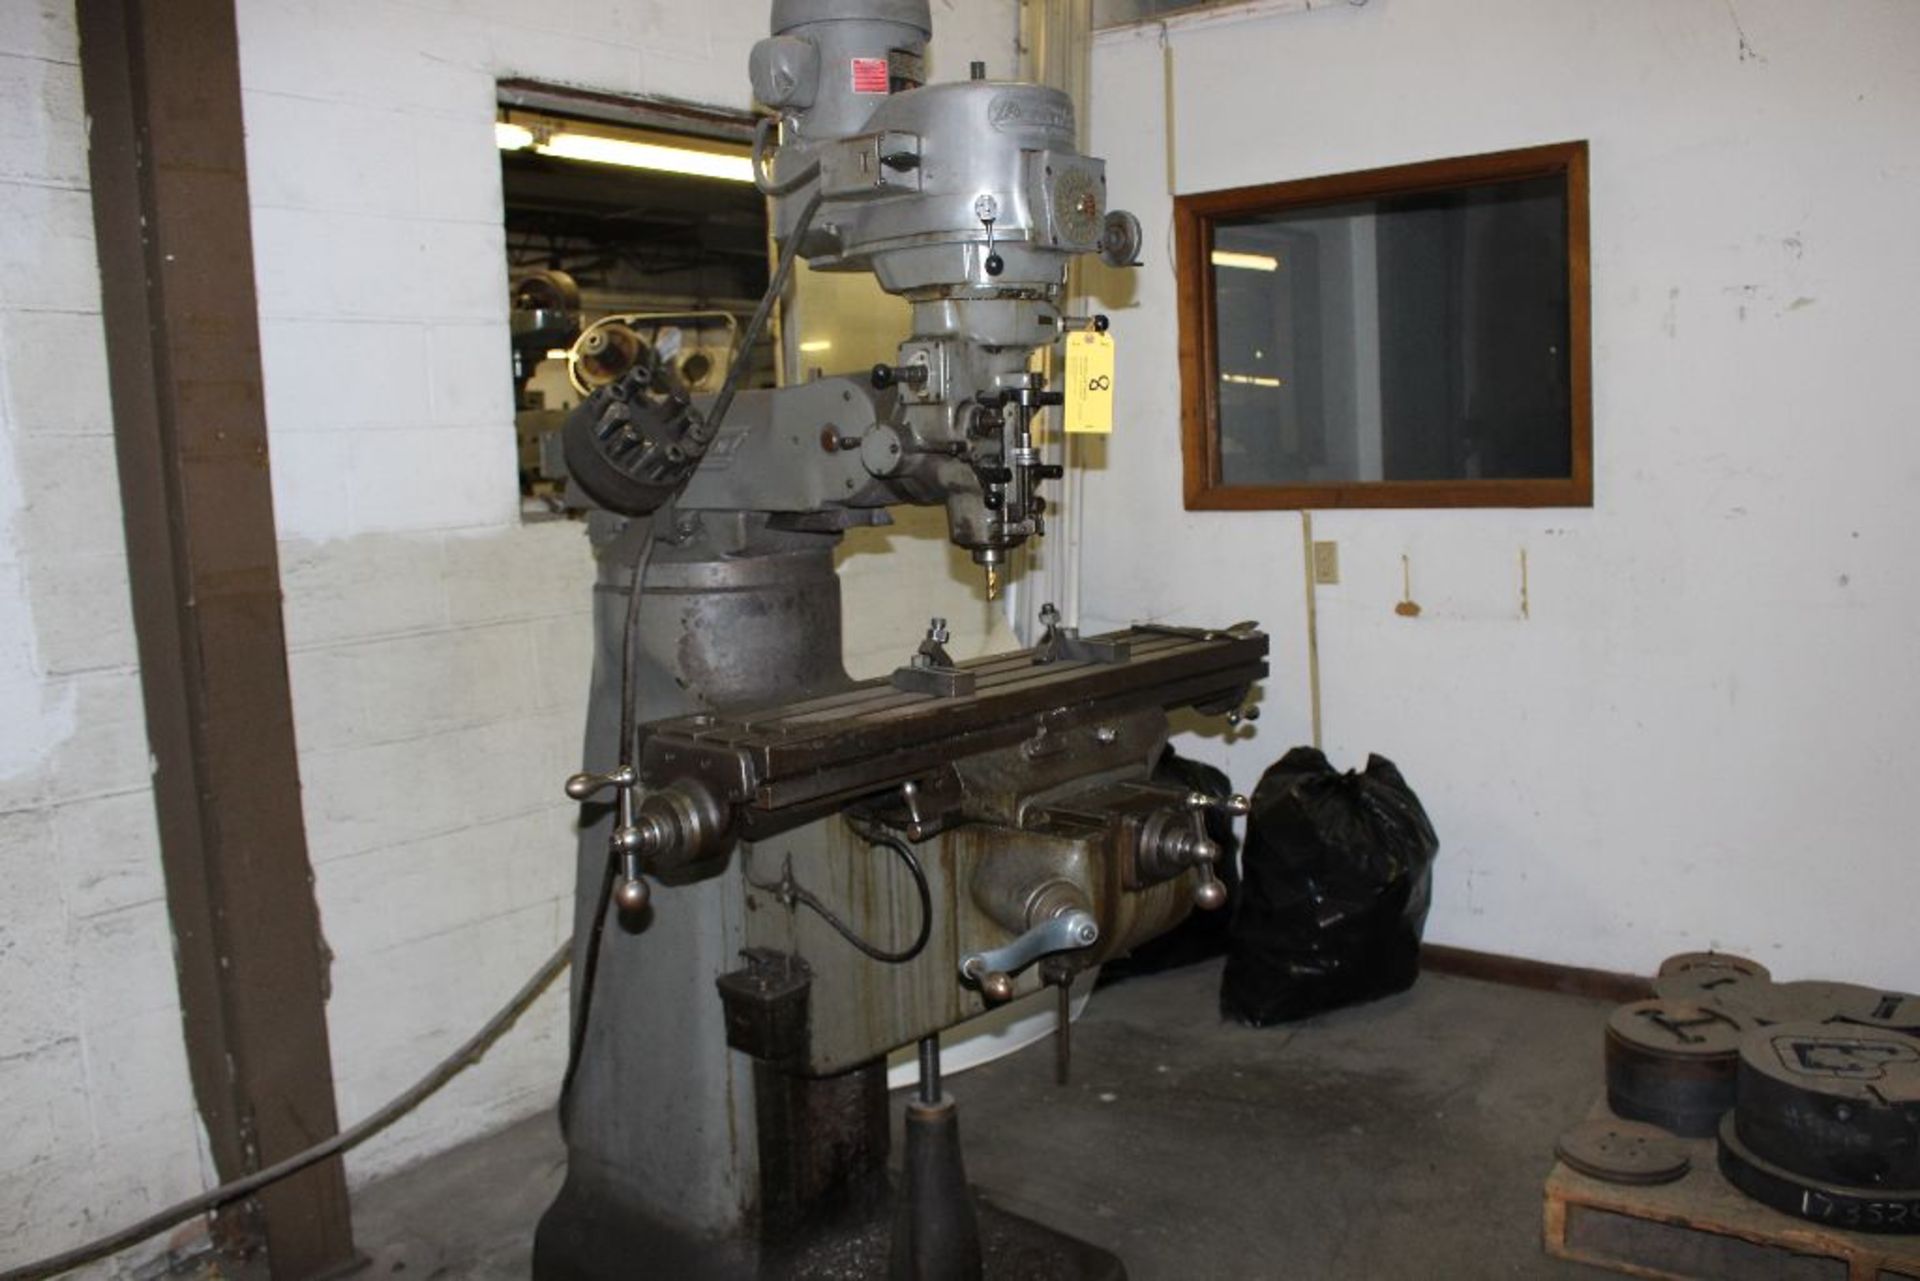 Bridgeport vertical mill, model J-Head, s/n 12BR176447, 9" x 42" table, does not have a power - Image 2 of 2